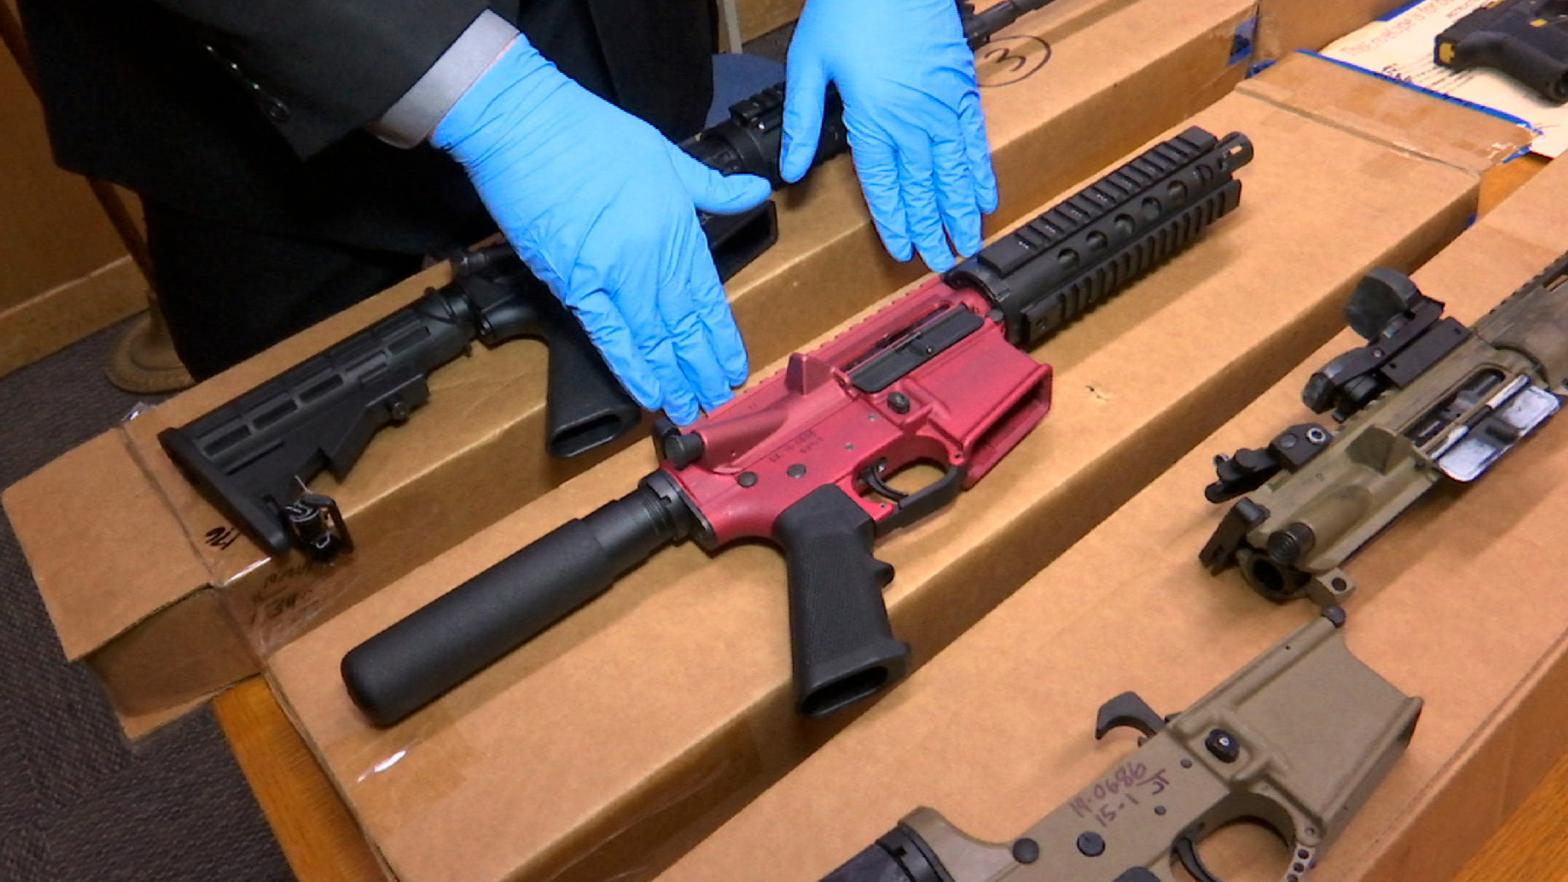 San Francisco police display untraceable firearms at a press conference in 2019. (Photo: Haven Daley, AP)